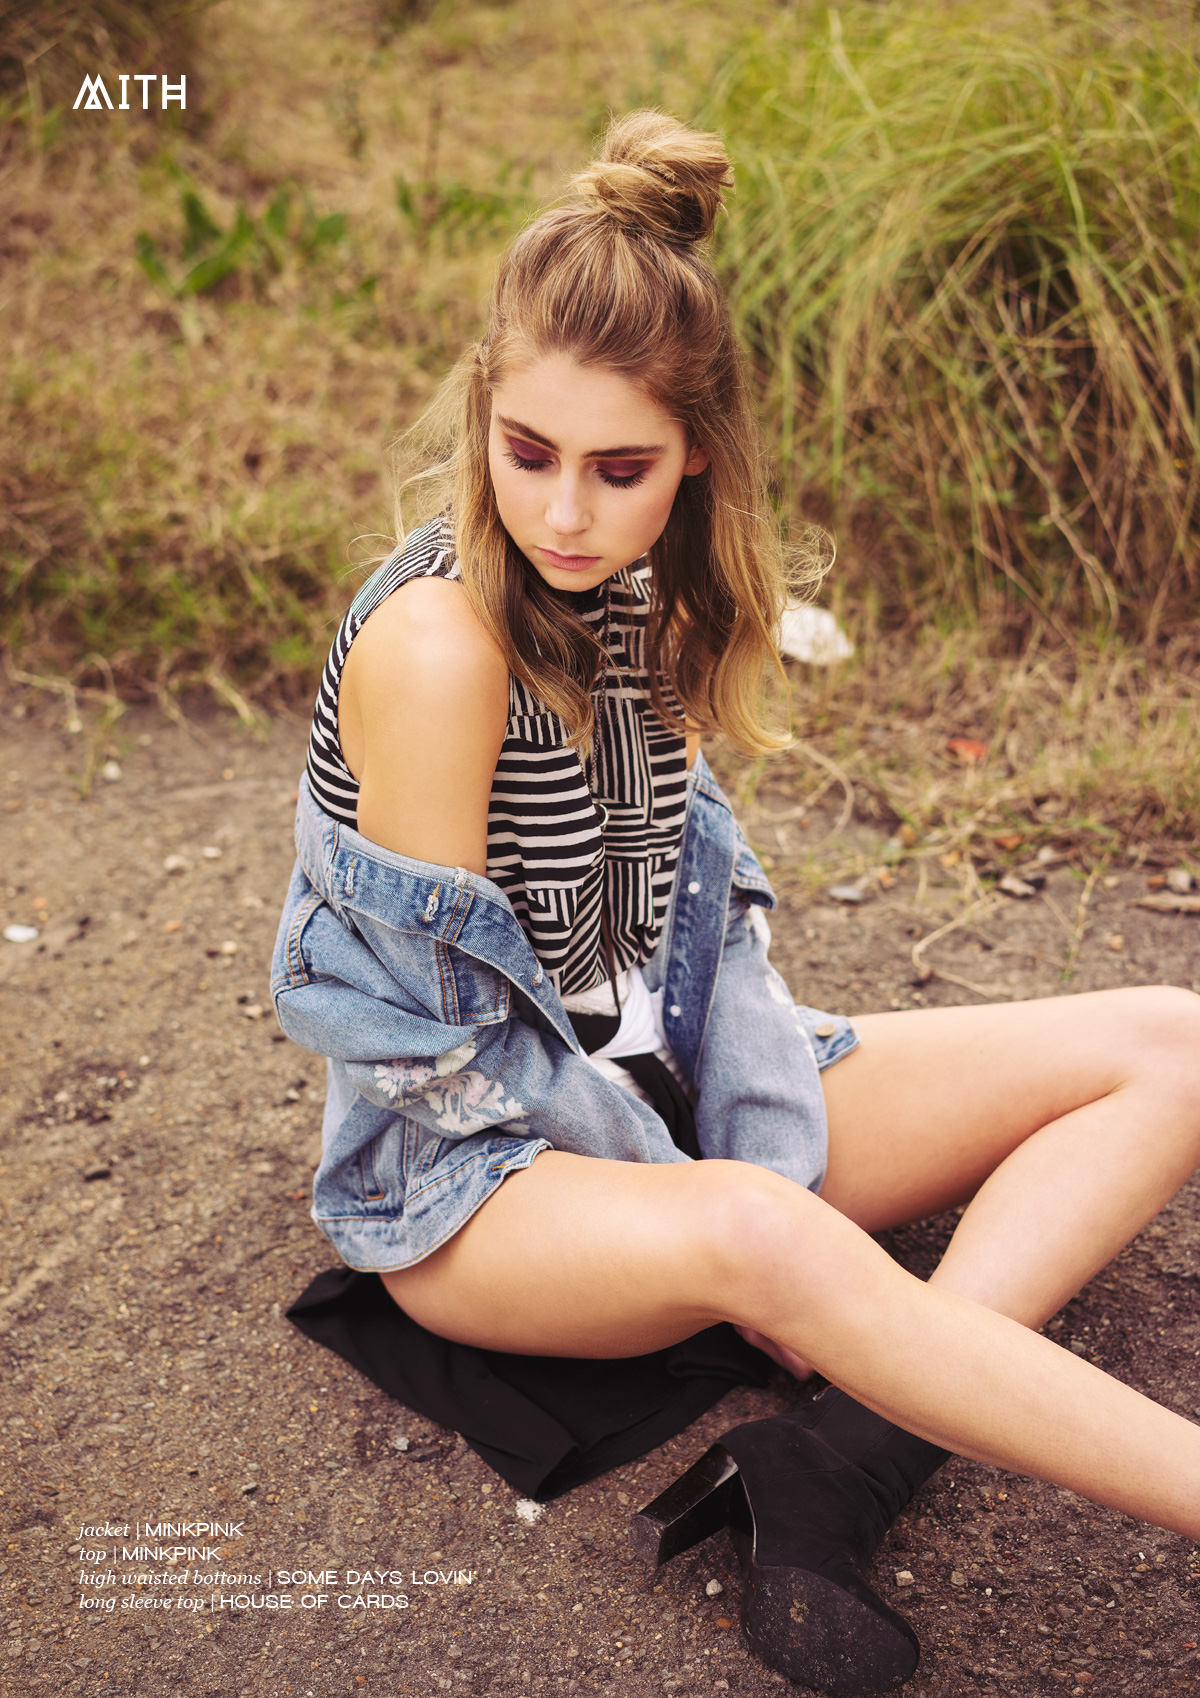 "Out & In" :: Paris Riddle @ FiveTwenty Management by Amy Nelson-Blain